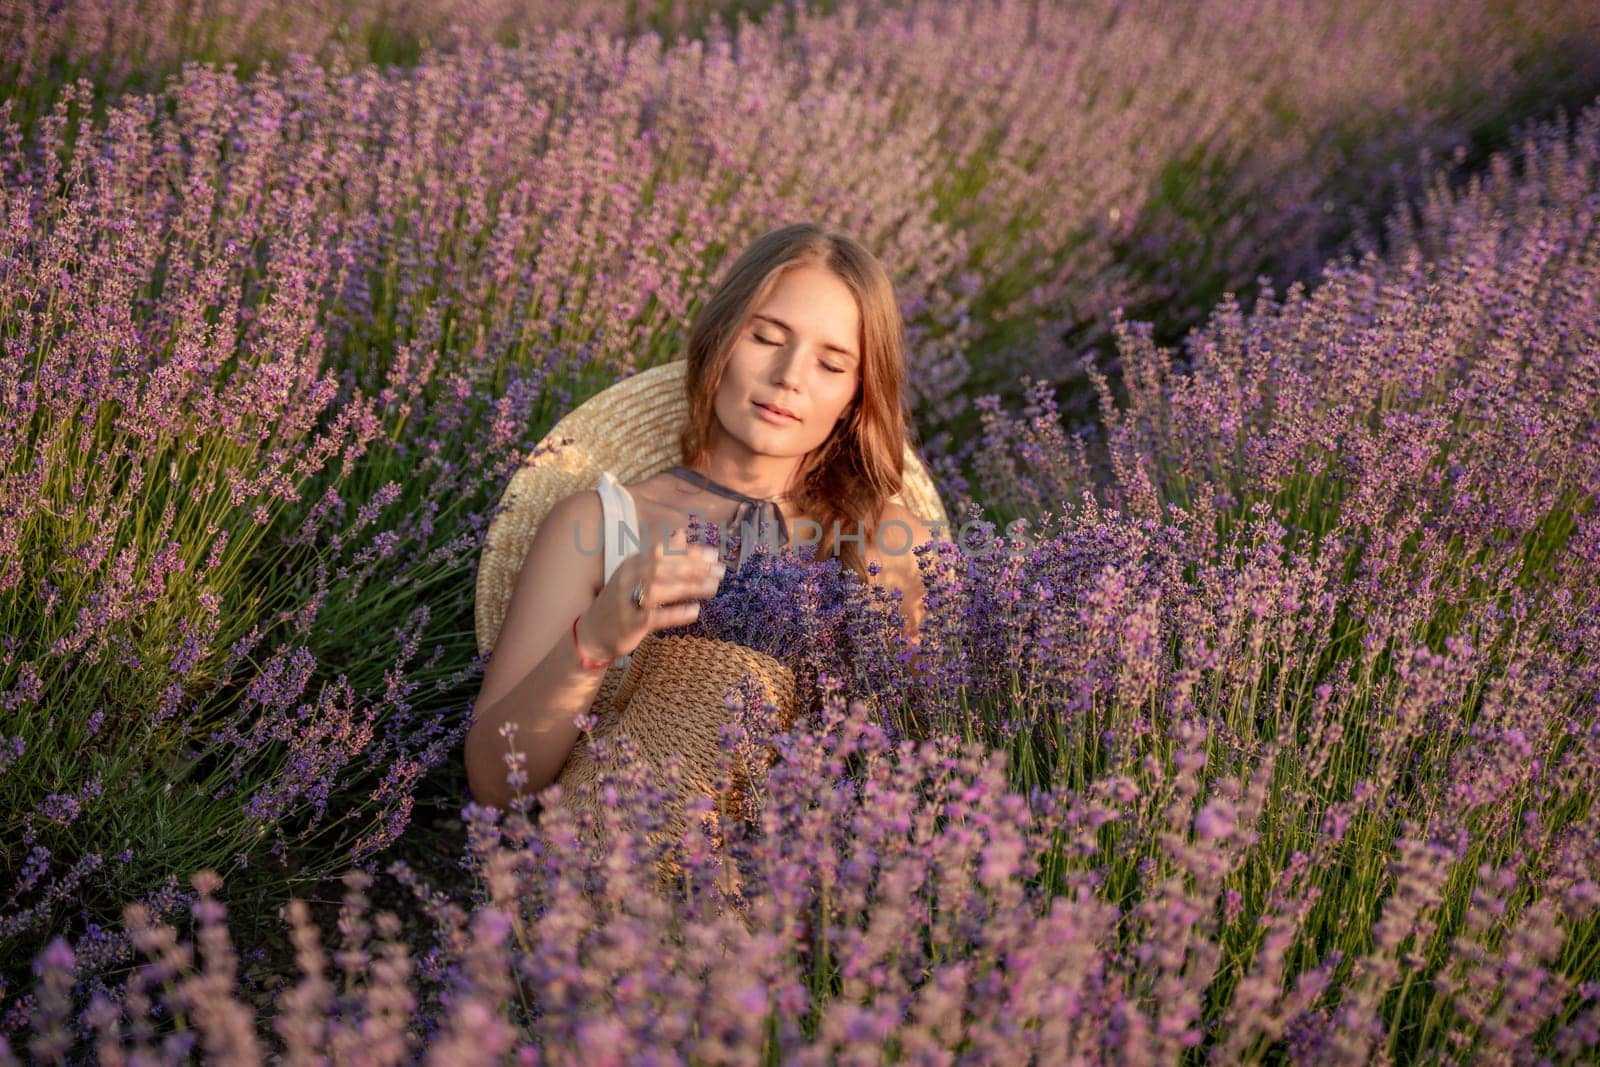 A woman is sitting in a field of lavender flowers. She is wearing a straw hat and holding a basket of flowers. The scene is peaceful and serene, with the woman enjoying the beauty of the flowers